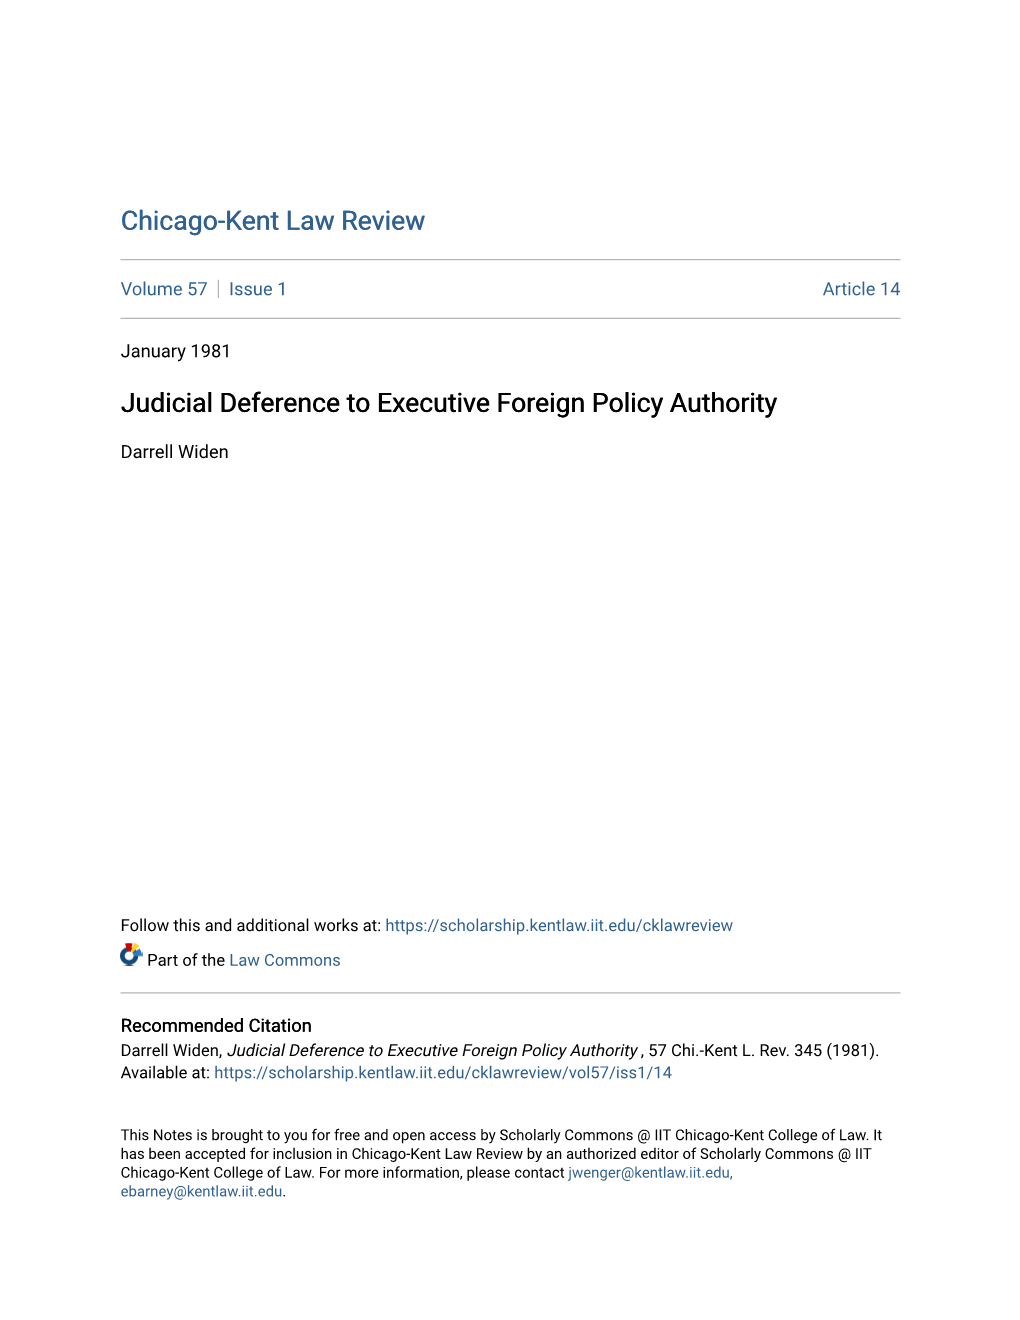 Judicial Deference to Executive Foreign Policy Authority